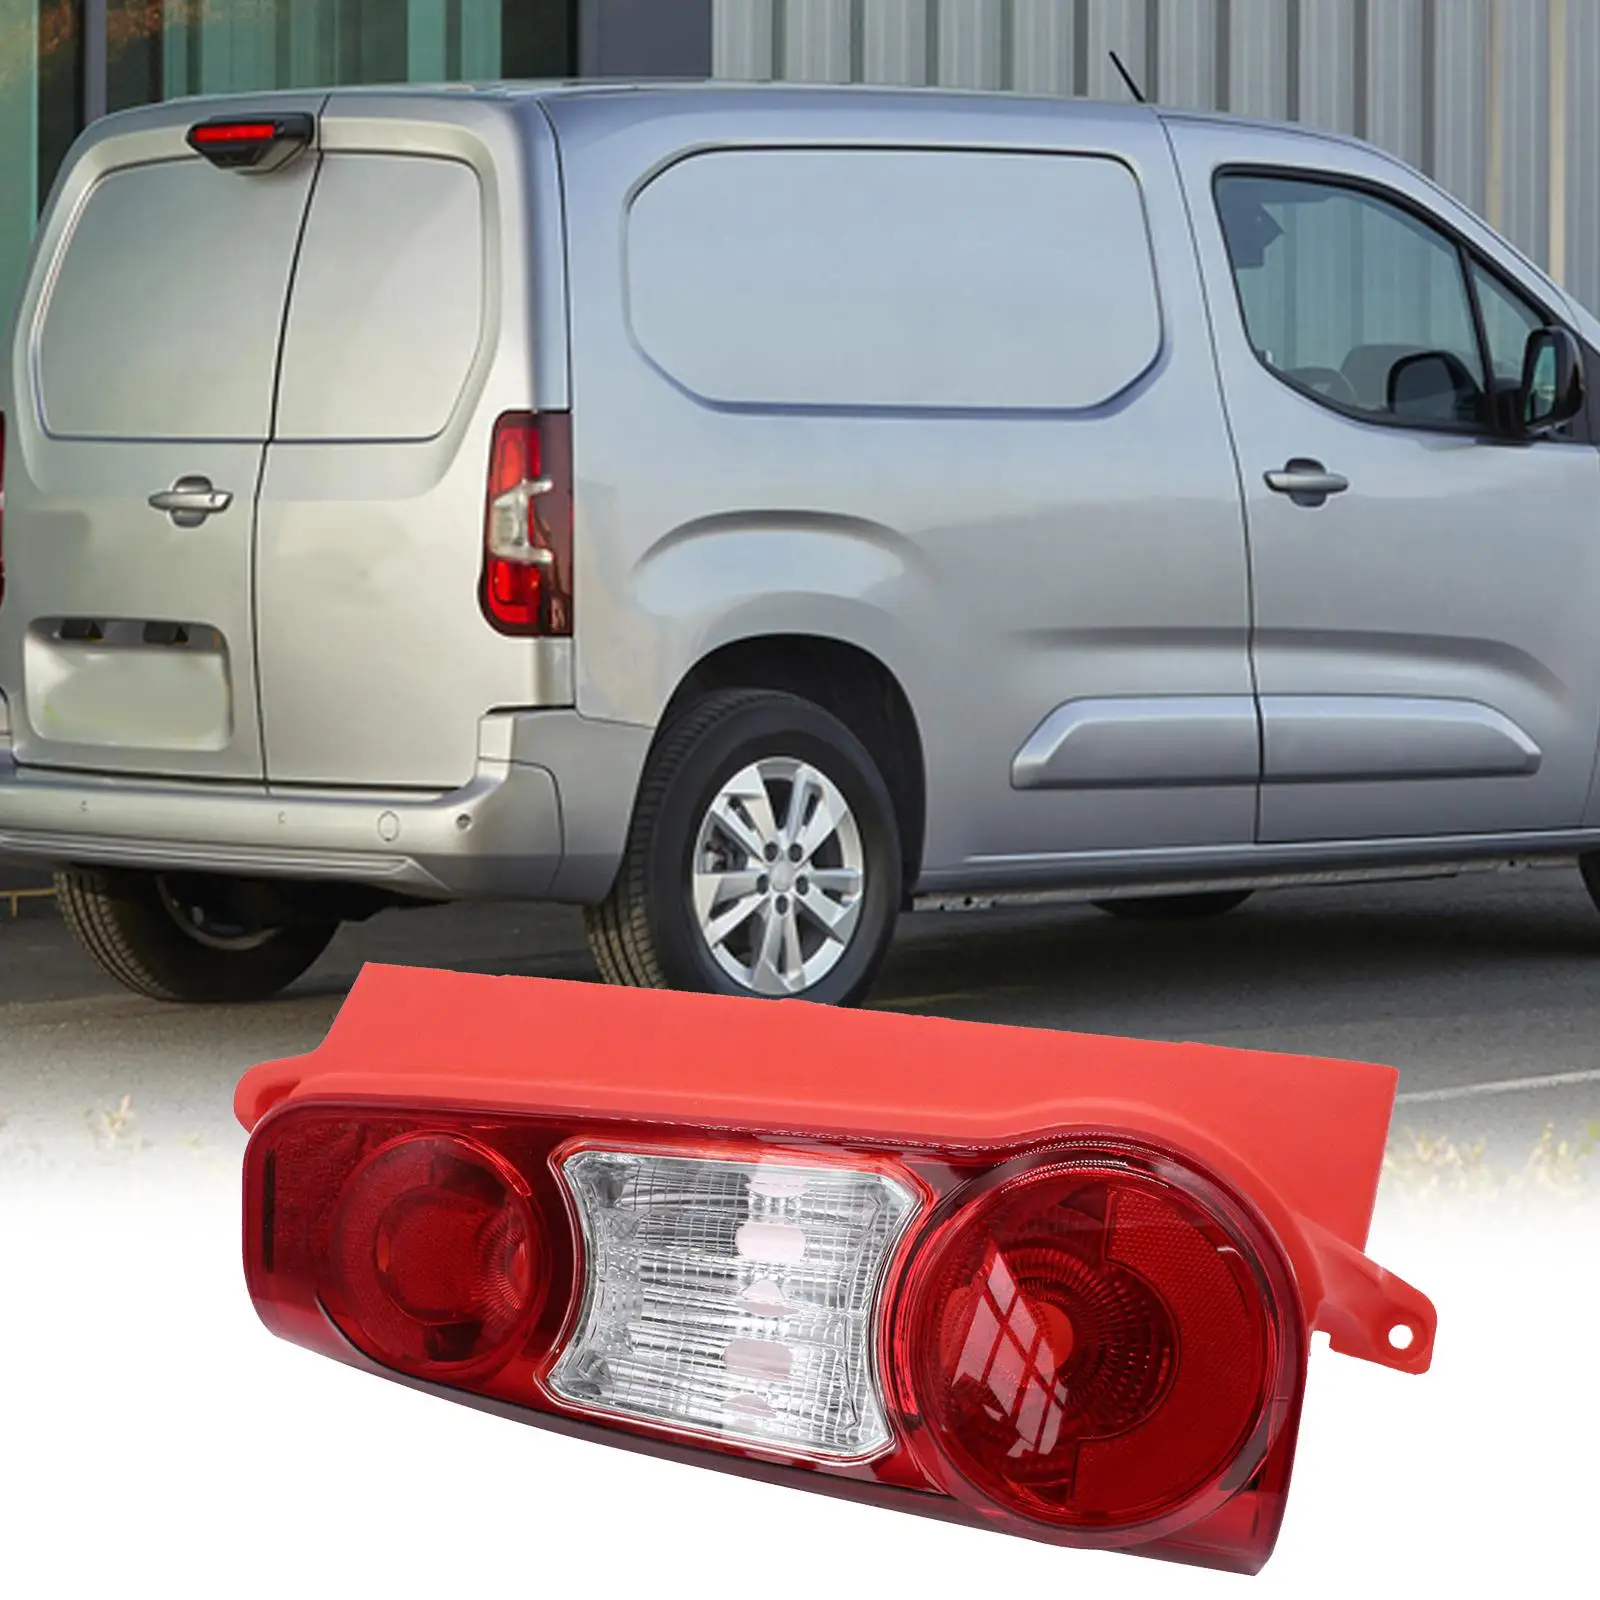 

Tail Light Rear Lamp 6350FJ Tail Lights Taillights Assembly for Peugeot Partner 2008-2012 Left Side Convenient Installation